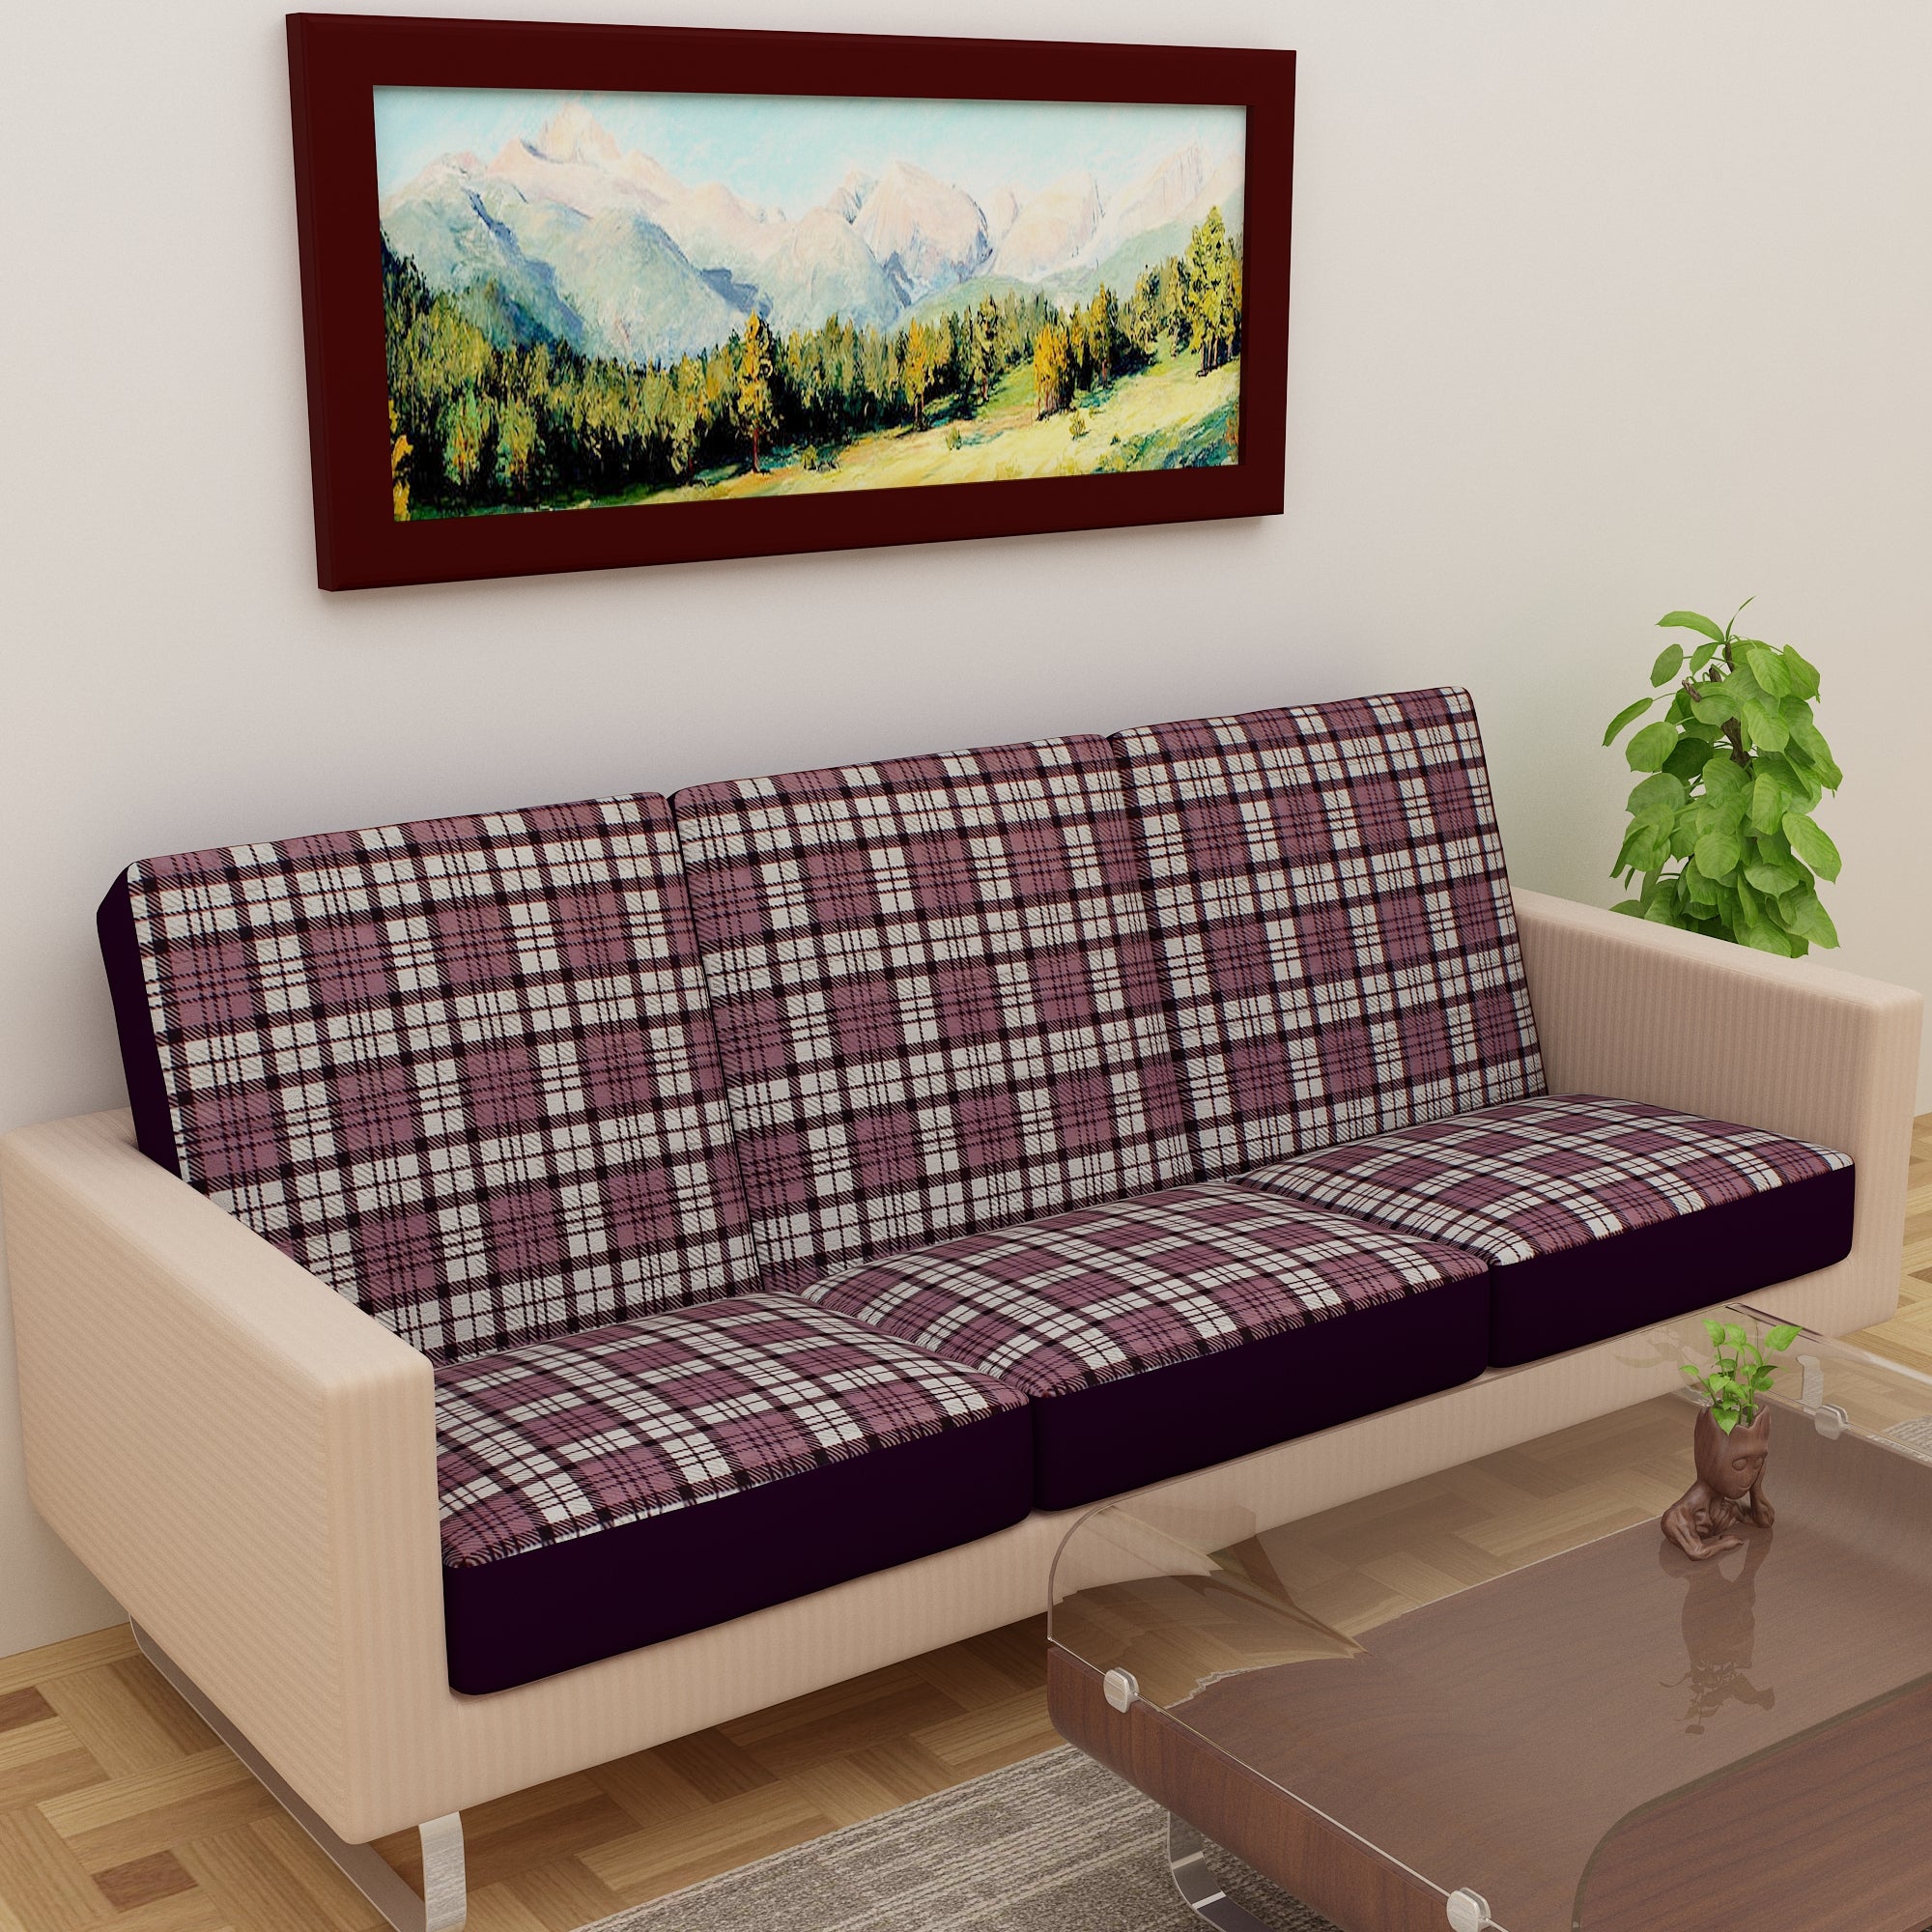 Waterproof Printed Sofa Seat Protector Cover with Stretchable Elastic, Grey - Dream Care Furnishings Private Limited